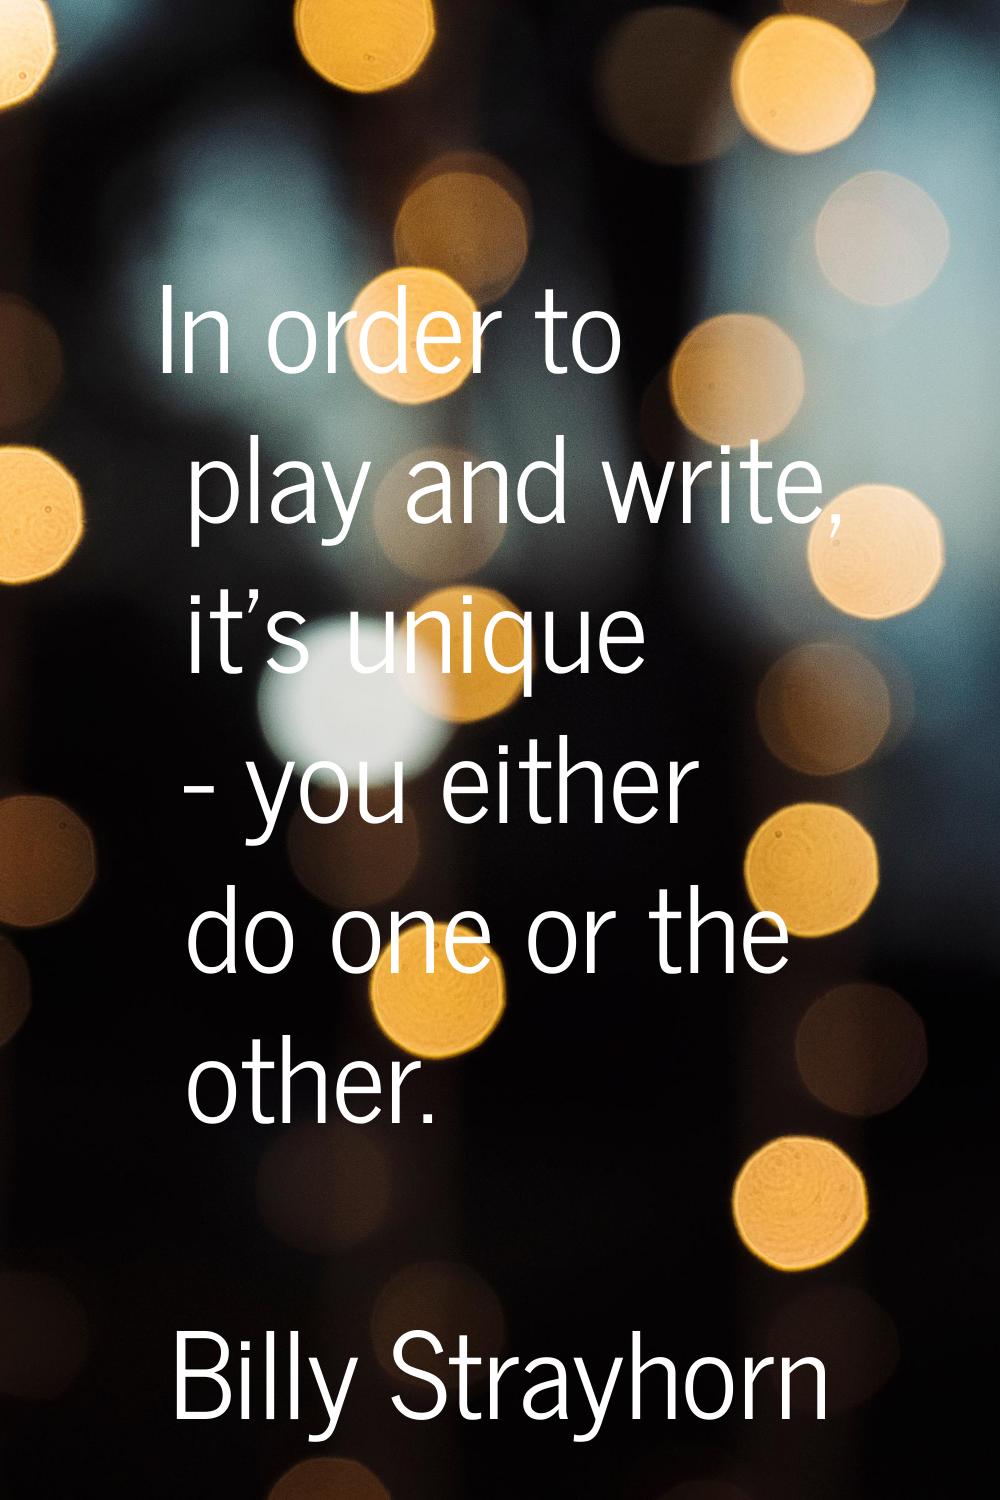 In order to play and write, it's unique - you either do one or the other.